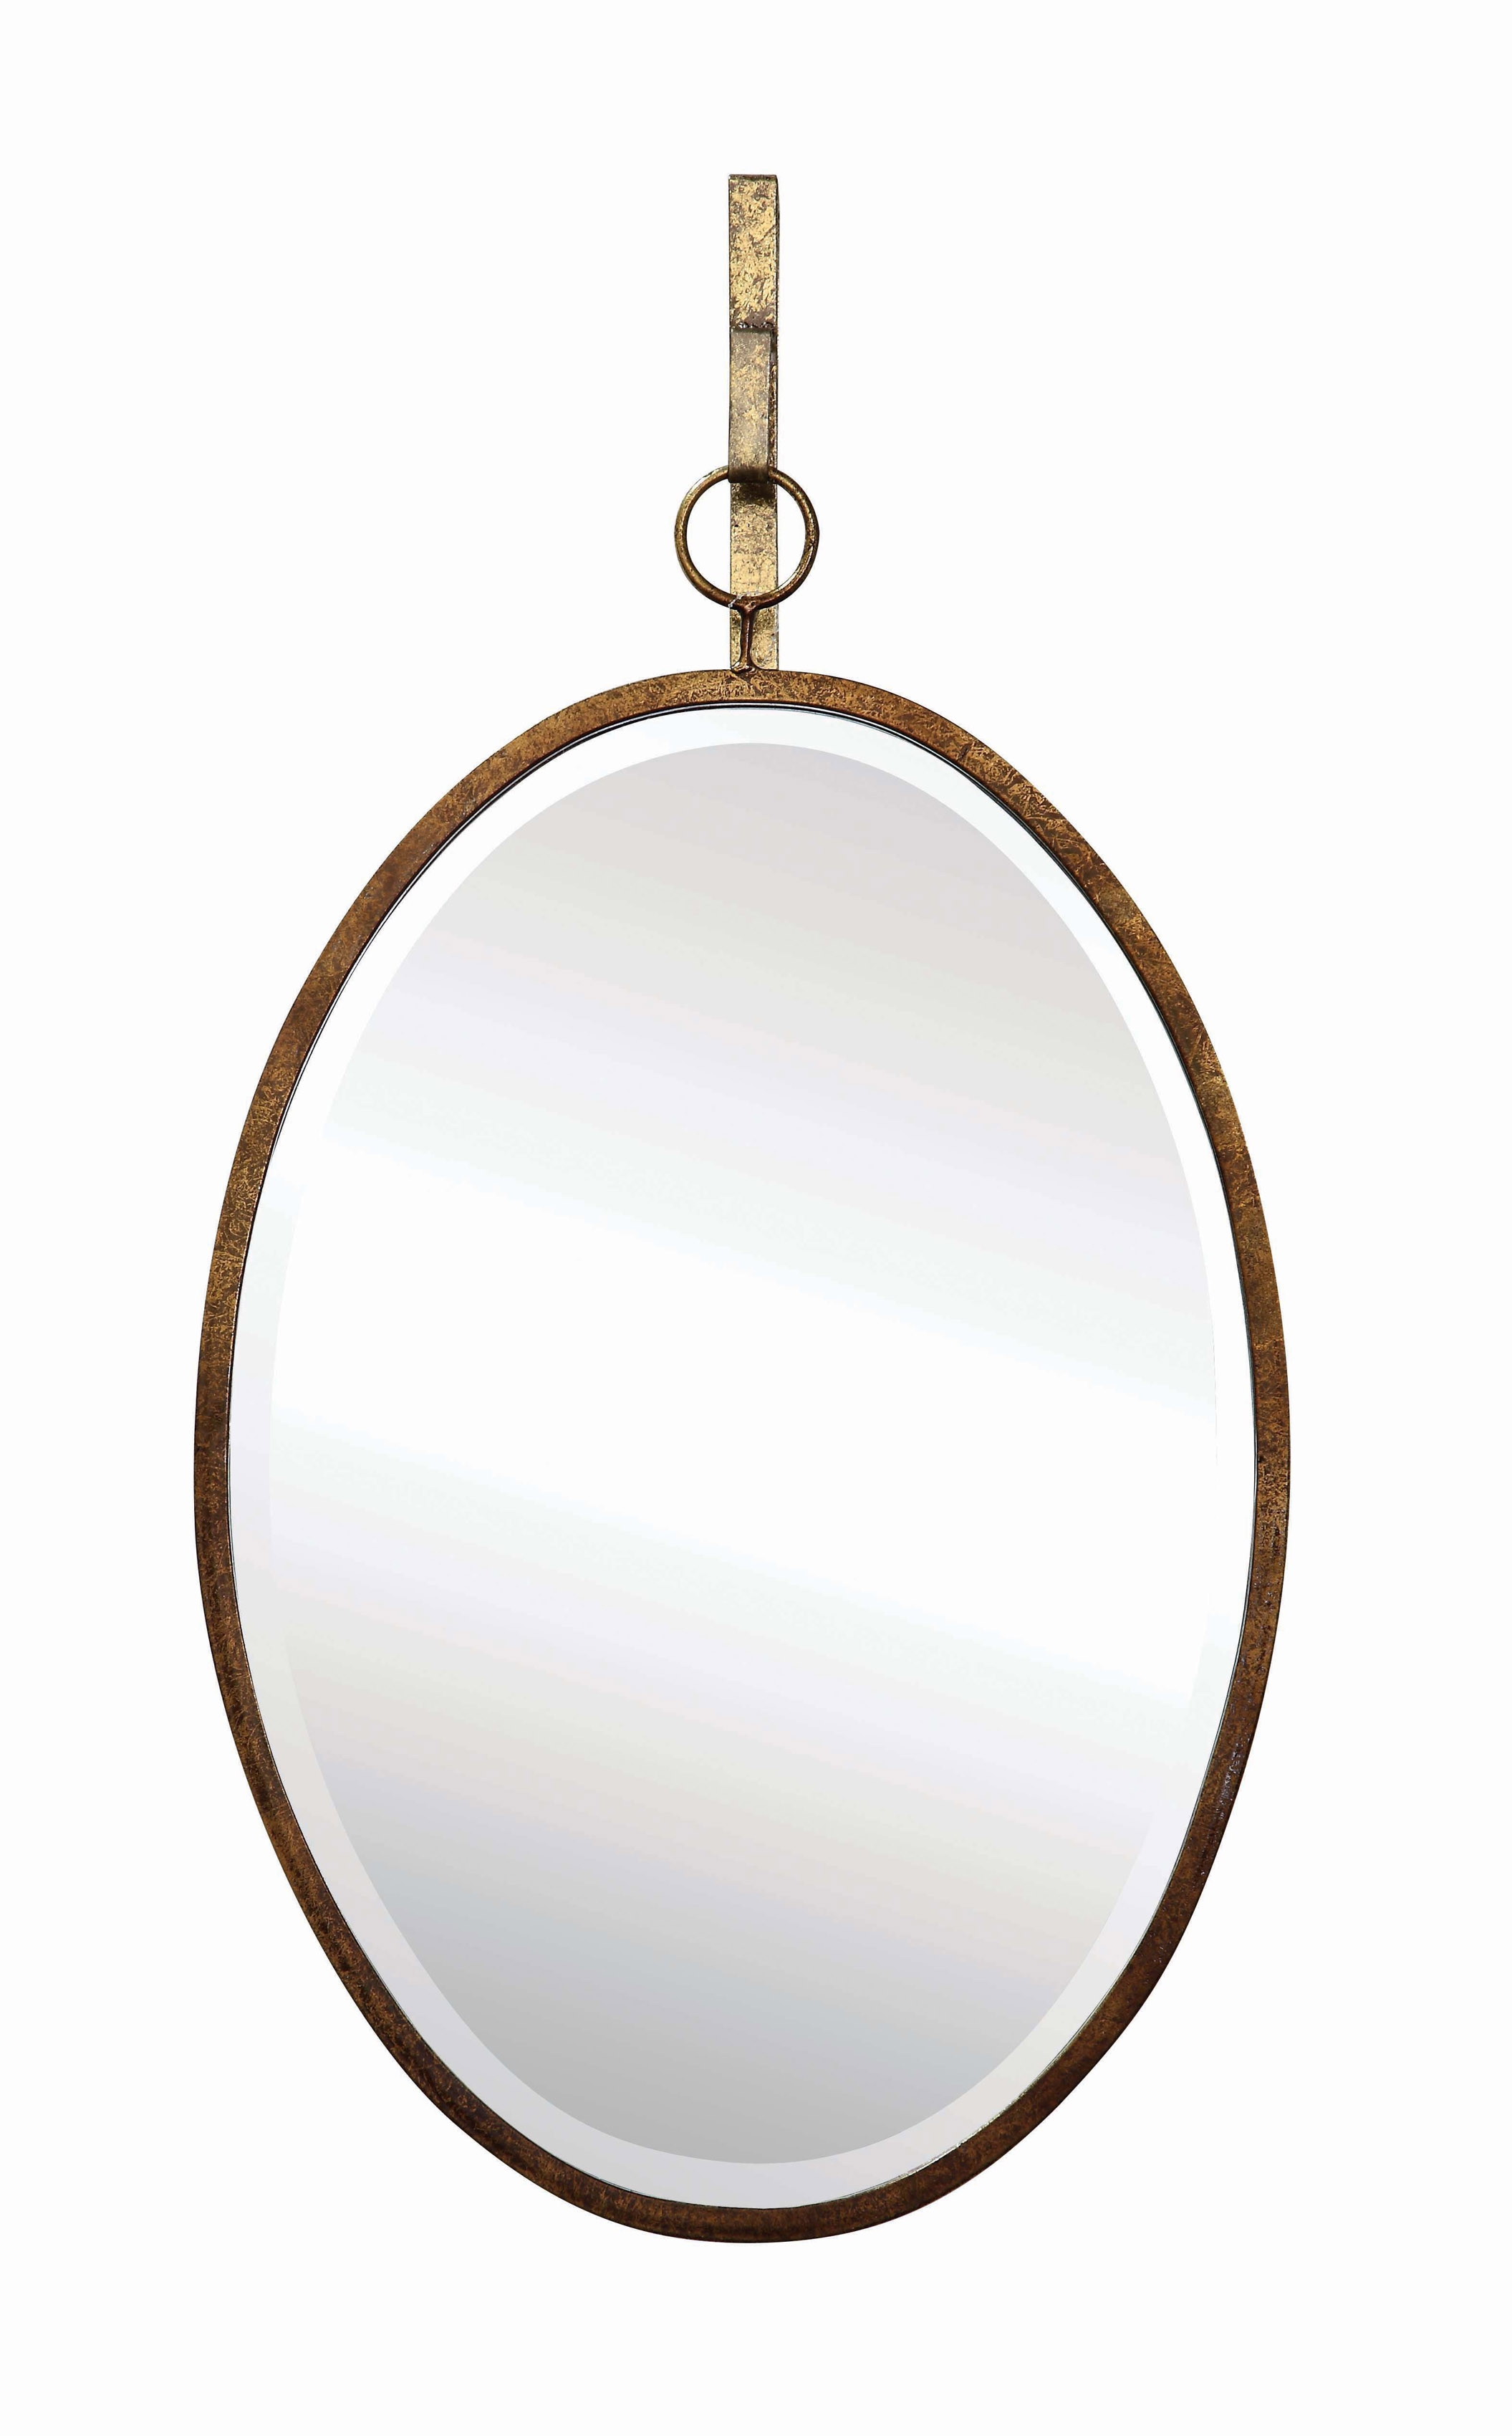 Oval Wall Mirror with Distressed Metal Frame & Hanging Bracket (Set of 2 Pieces) - Image 0